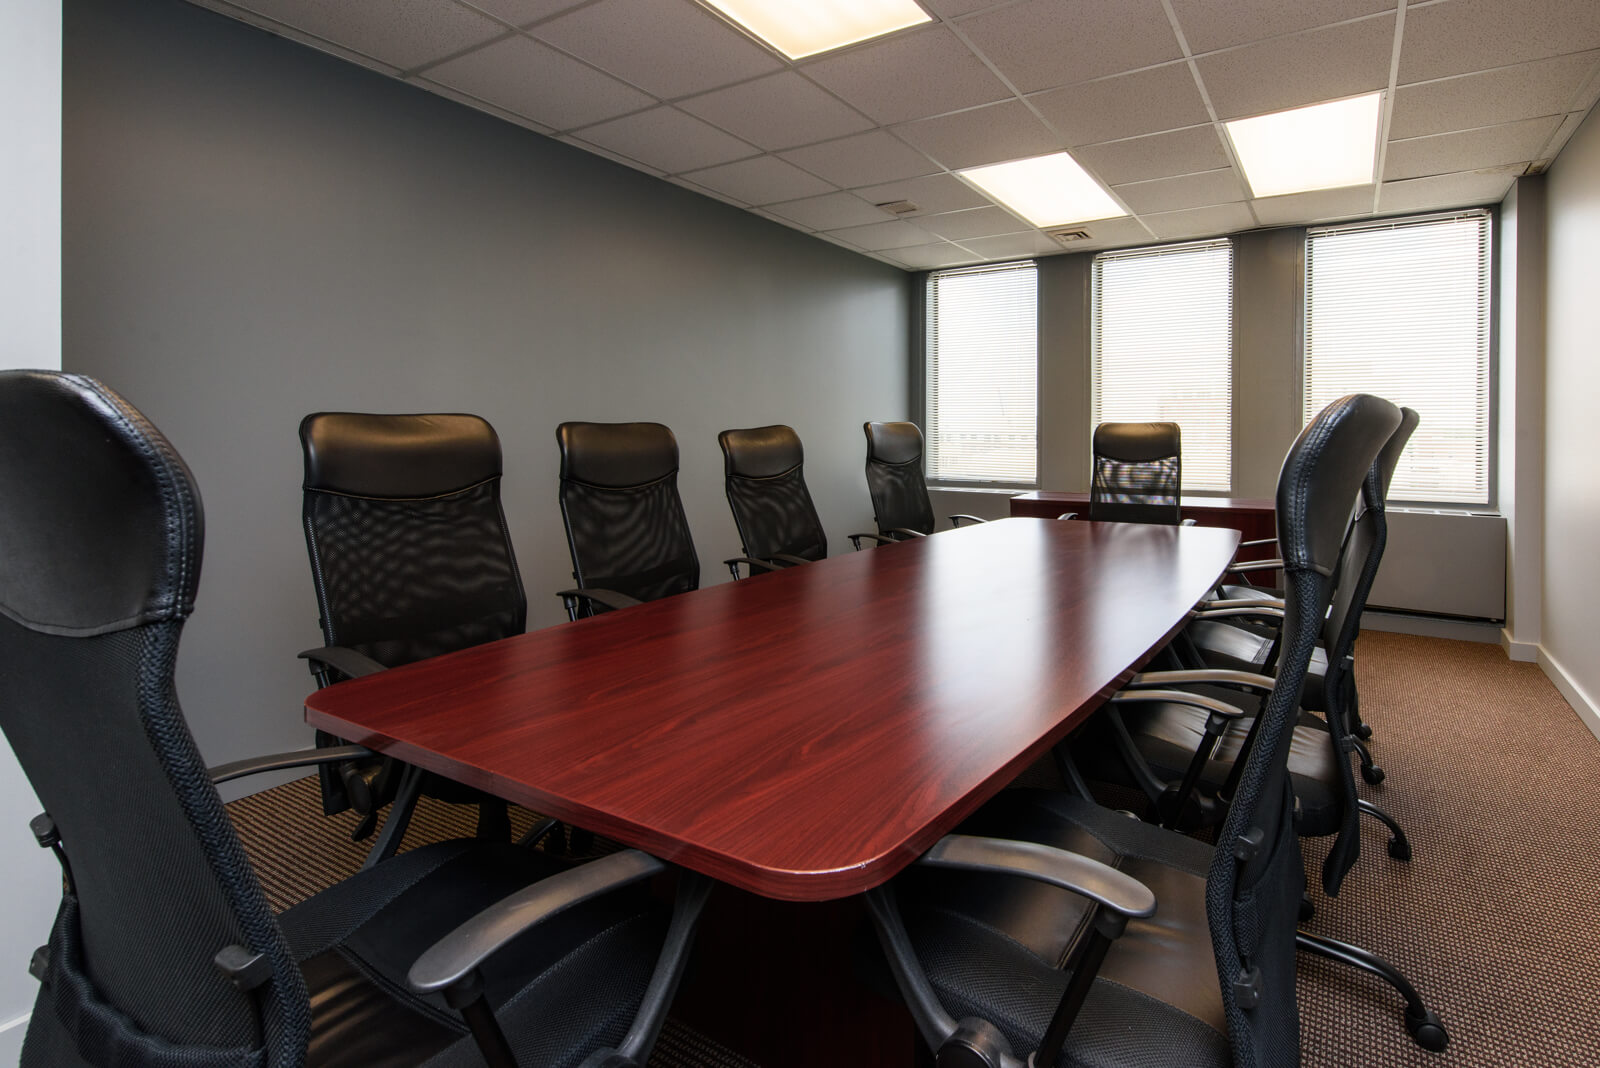 Conference room amenity at 1010 Lake Street, Oak Park, IL office space for lease